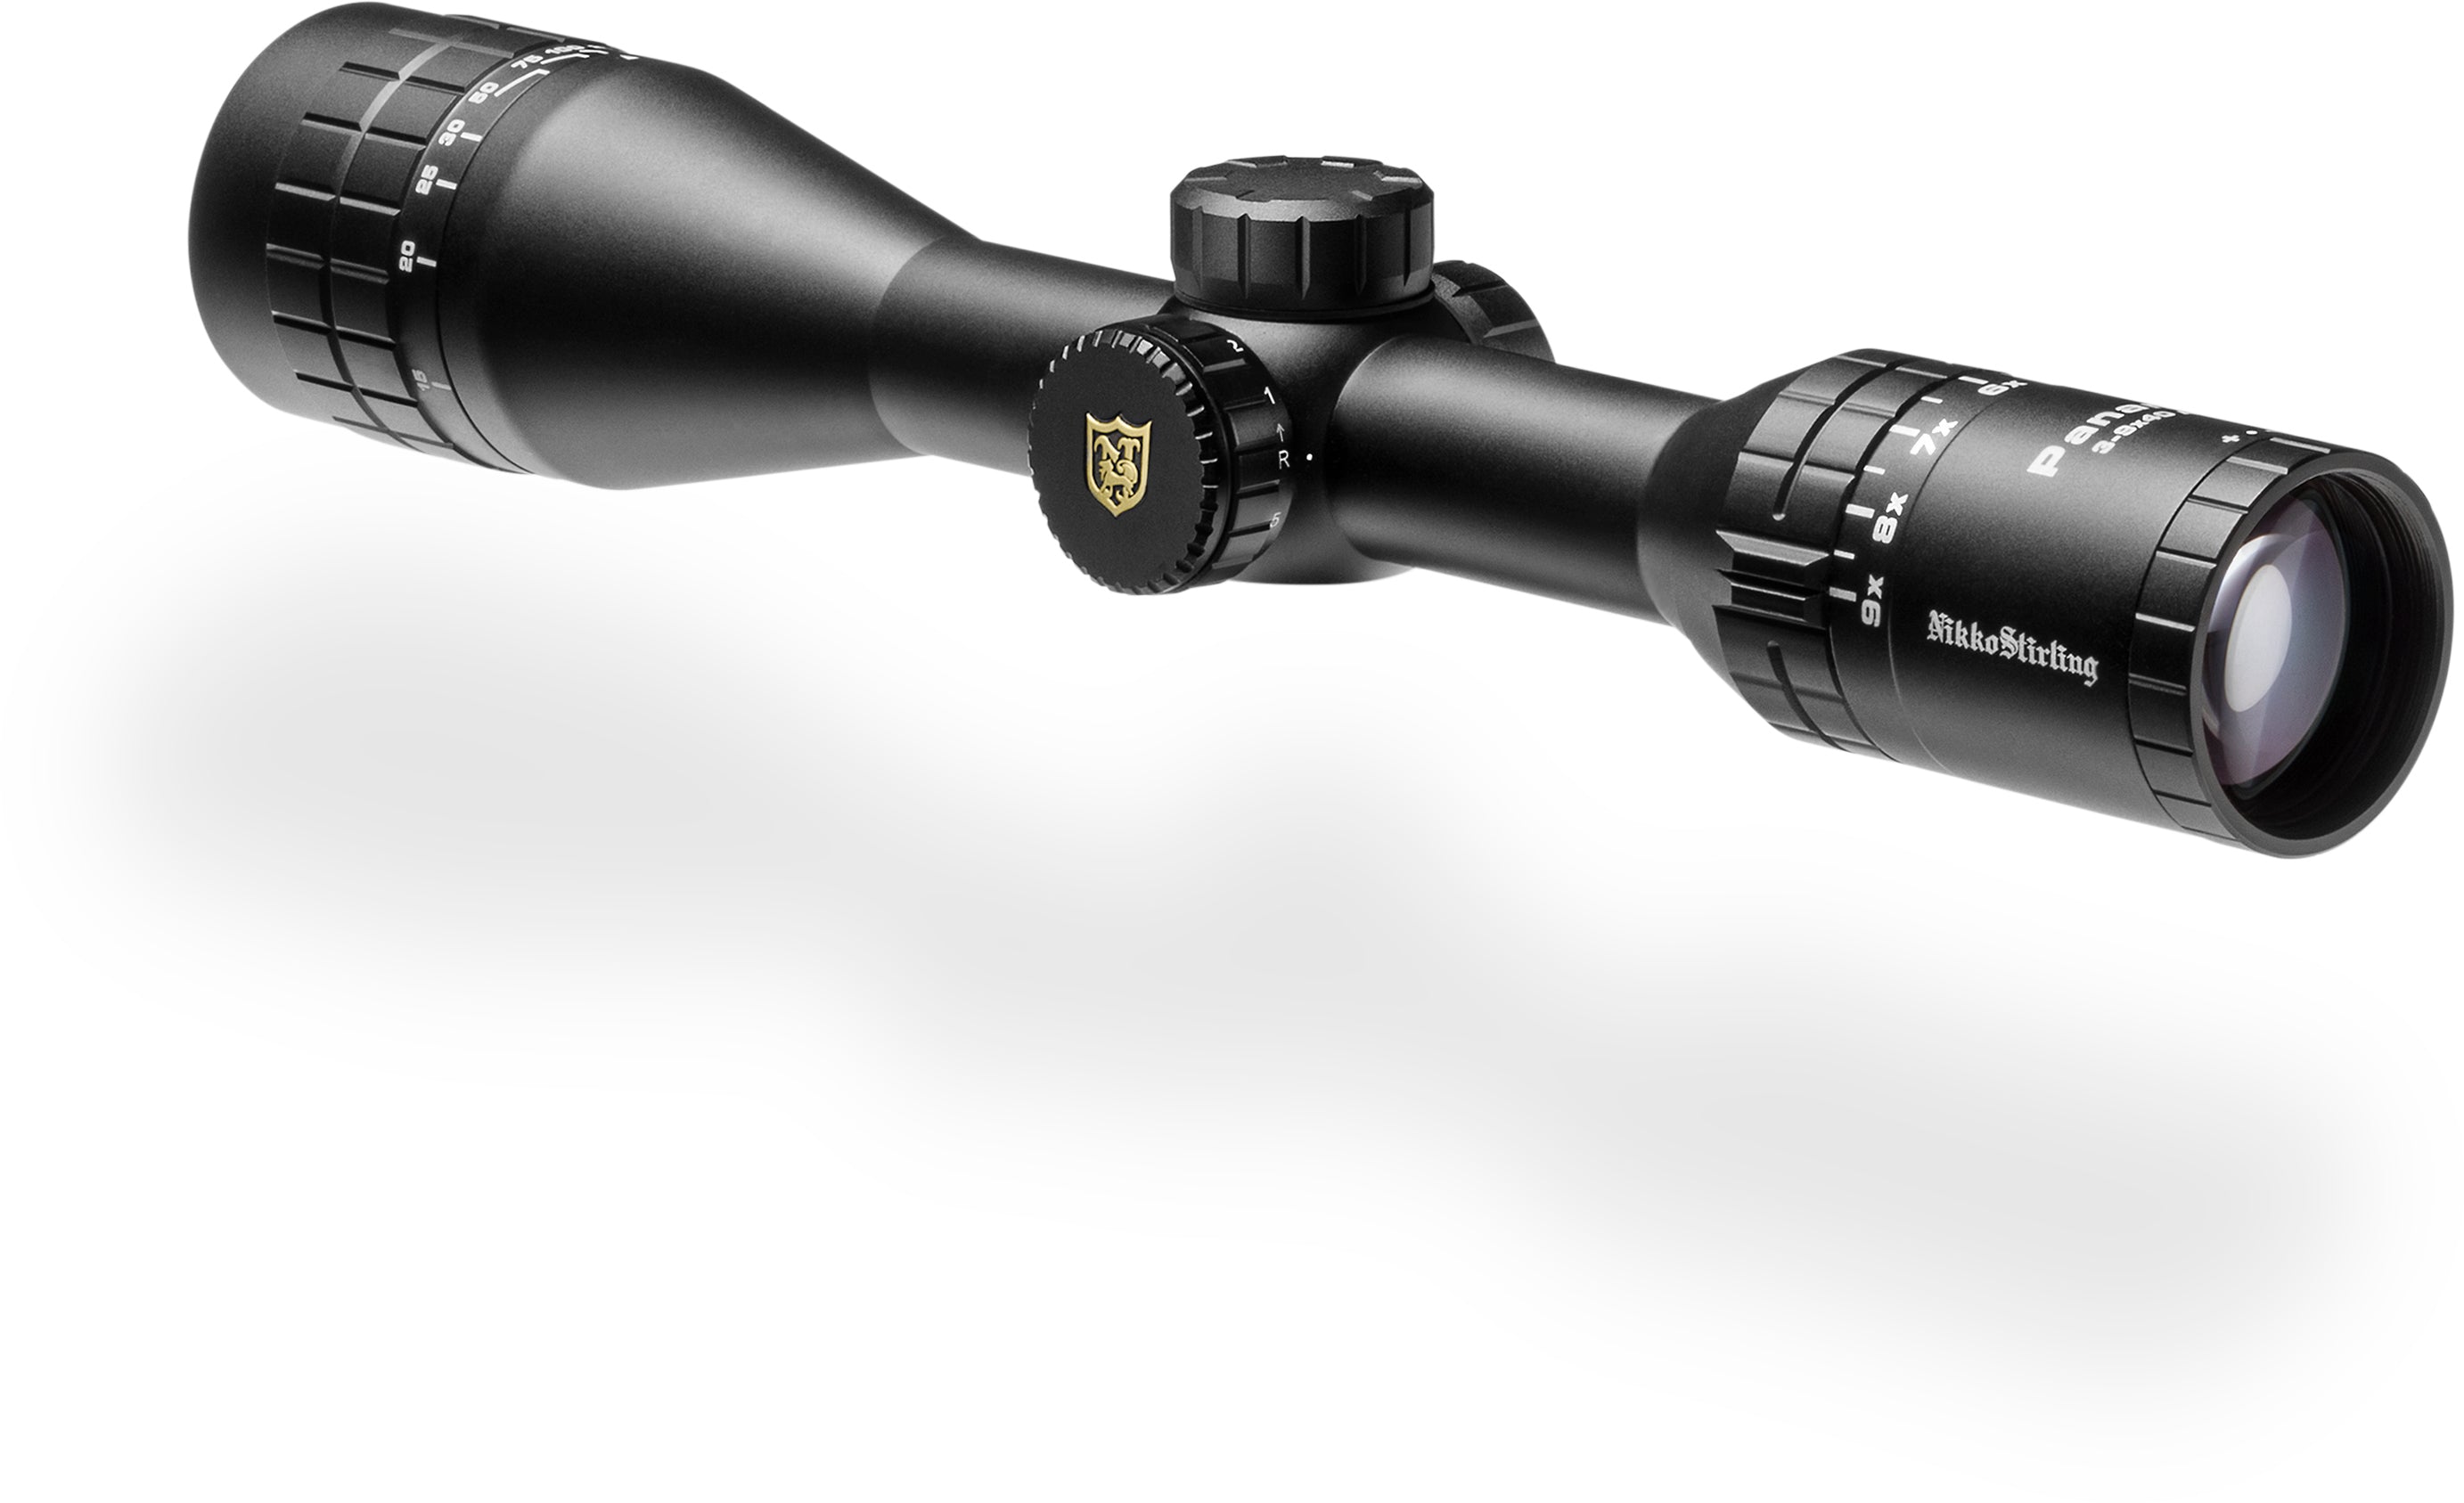 Nikko Stirling Panamax 3-9x40 Half MD Reticle -  - Mansfield Hunting & Fishing - Products to prepare for Corona Virus